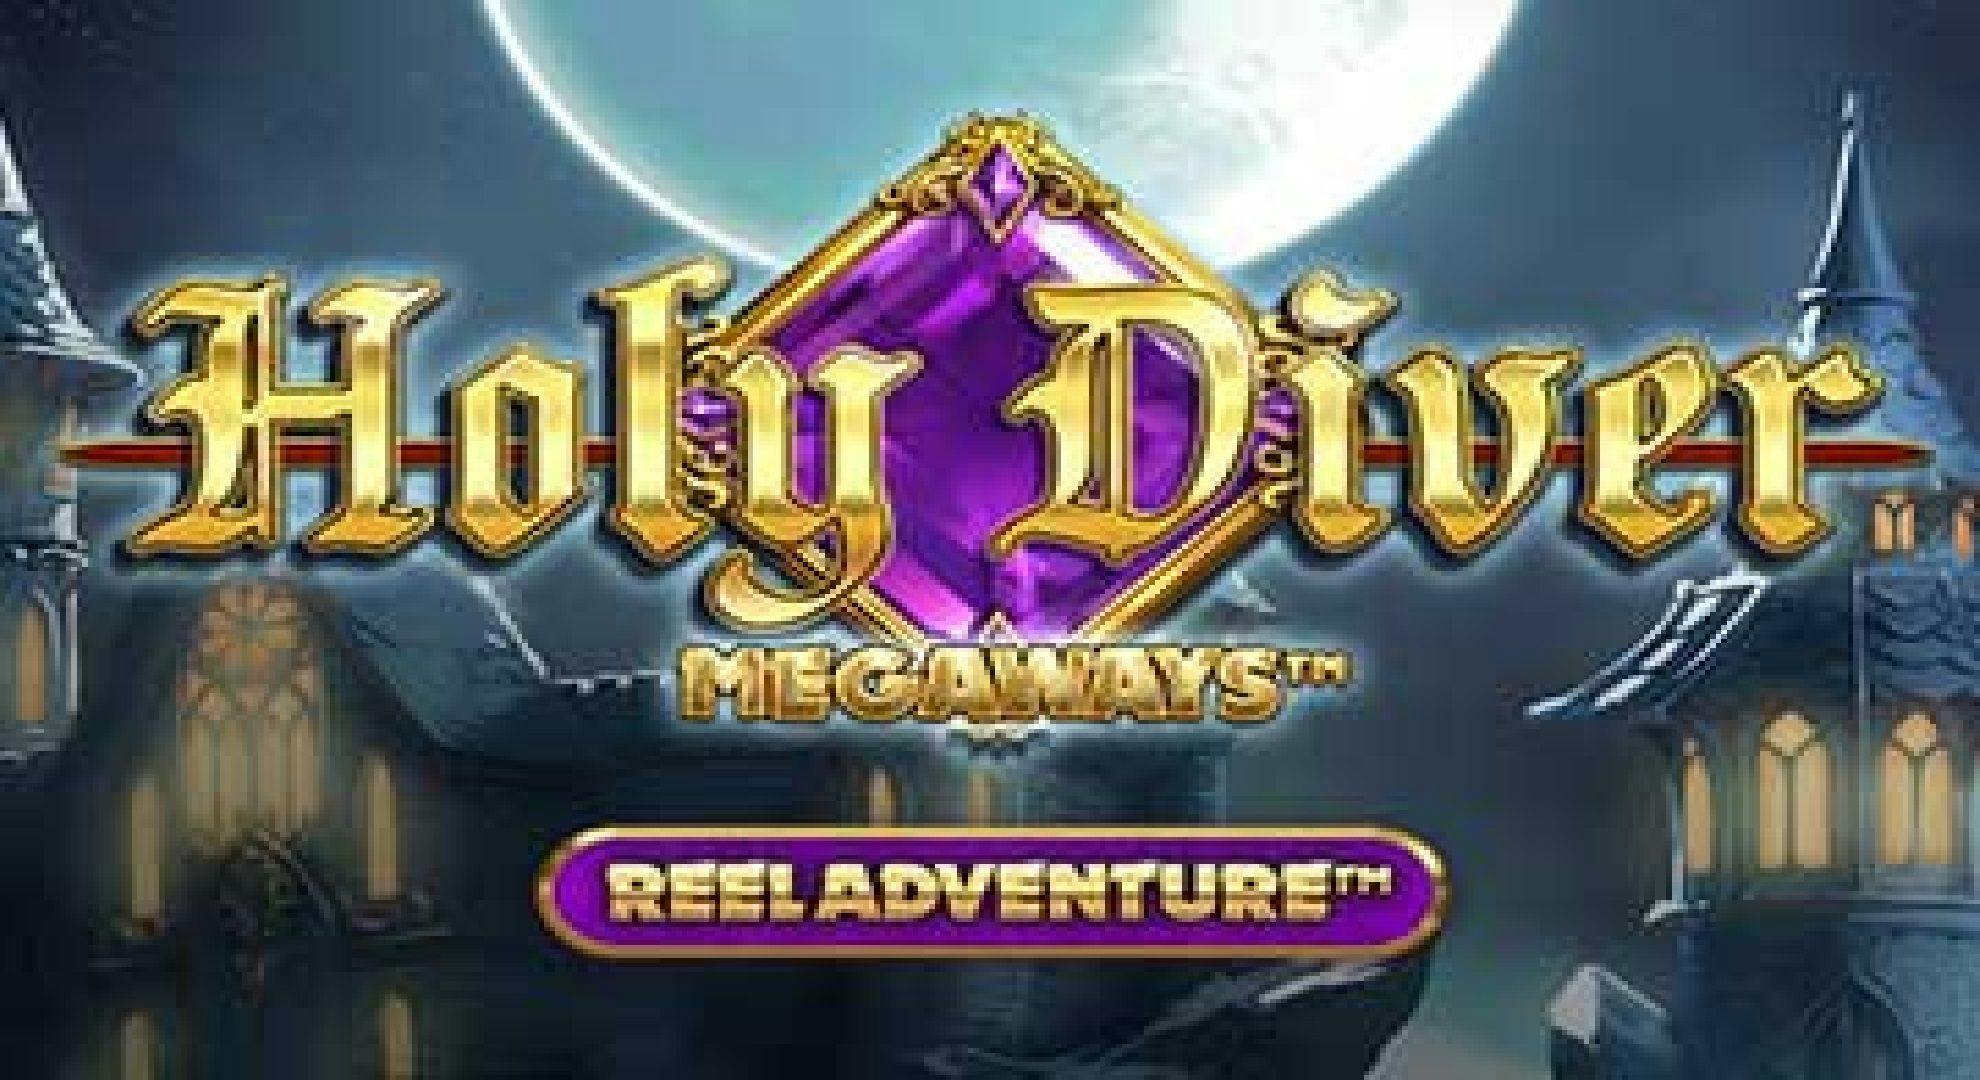 Holy Diver Slot Online Free Play